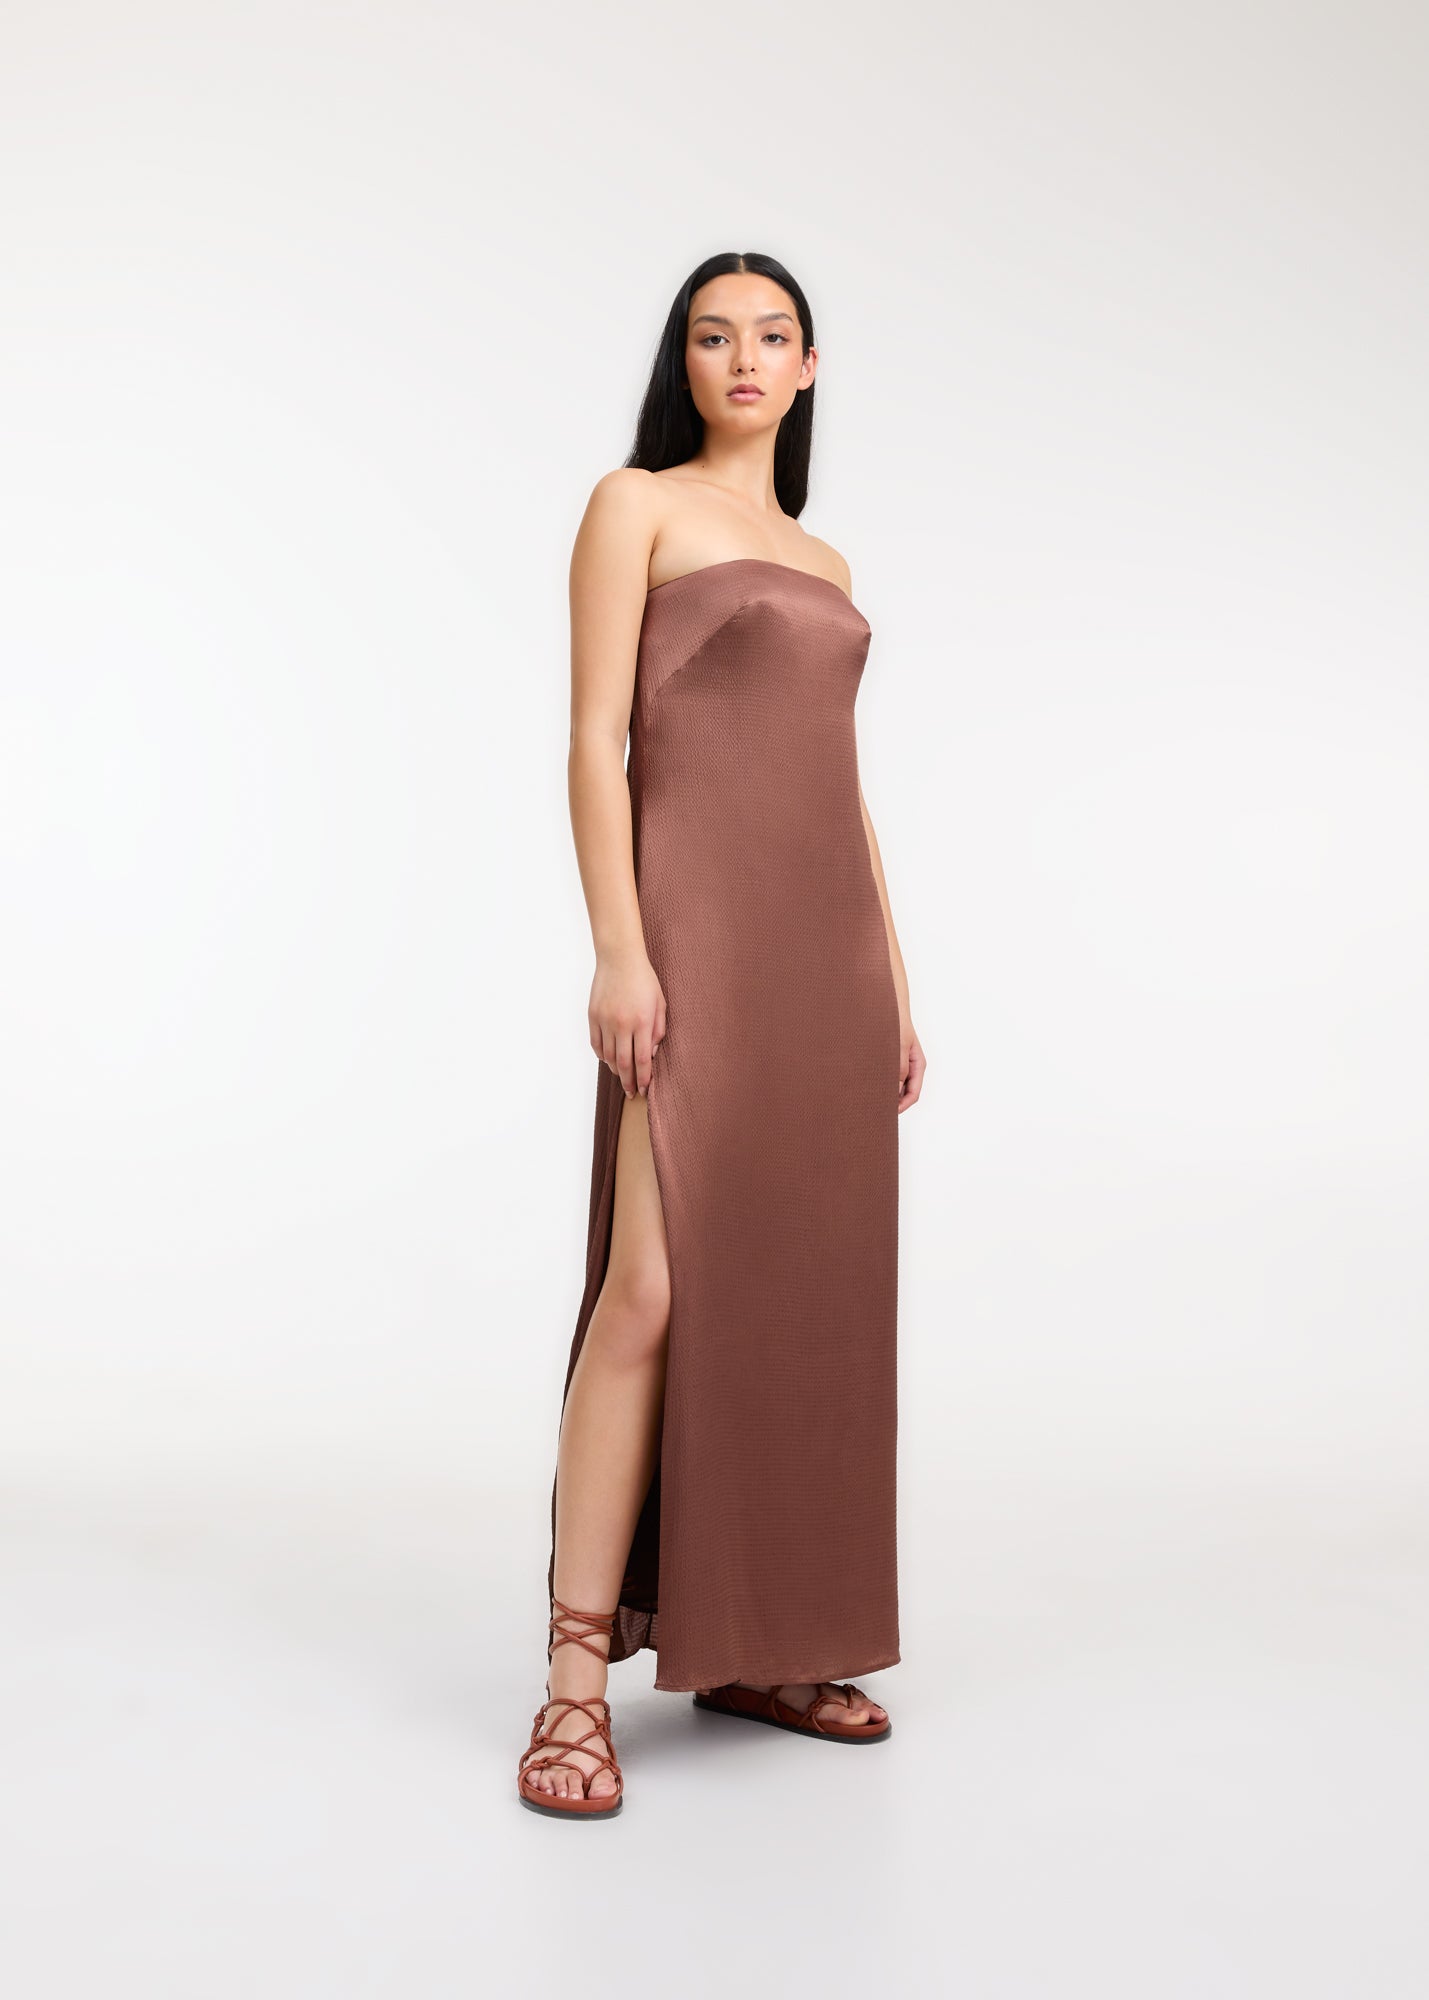 ROAME ARCH DRESS IN COCOA